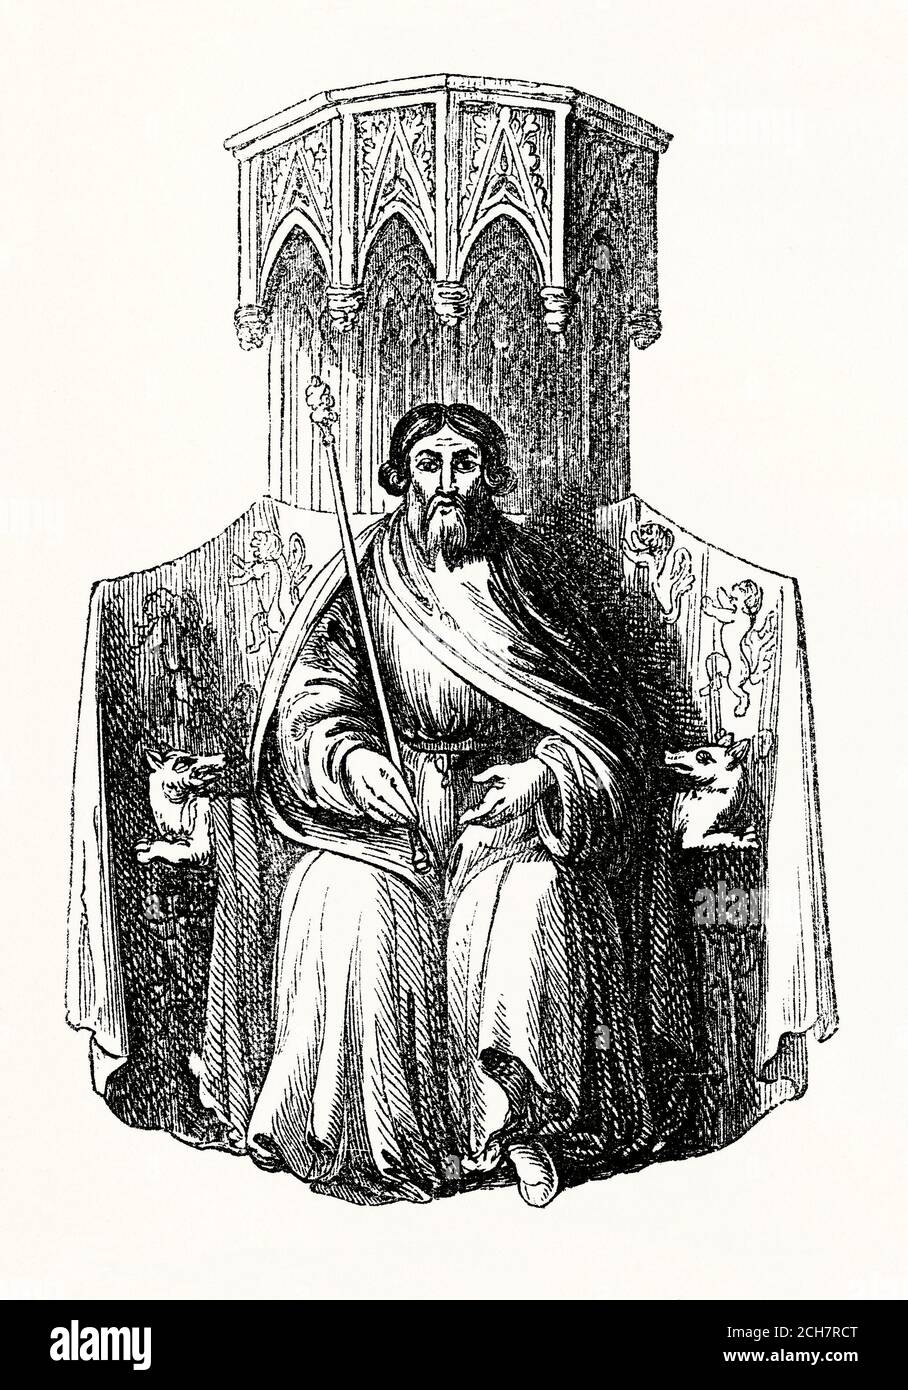 An old engraving of Owen Glendower (Owain ab Gruffydd, lord of Glyndyfrdwy, Owain Glyndŵr or Glyn Dŵr, c. 1359–c. 1415). He was a Welsh leader in the war of independence aimed at ending English rule in Wales. He was the last native Welshman to be Prince of Wales. In 1400 Glyndŵr began the Welsh Revolt against the rule of Henry IV. The uprising was initially successful and large areas of Wales were controlled. The uprising was eventually suppressed by the English. Glyndŵr avoided capture. With his death Owain acquired folk hero status and is often regarded as the father of Welsh nationalism. Stock Photo